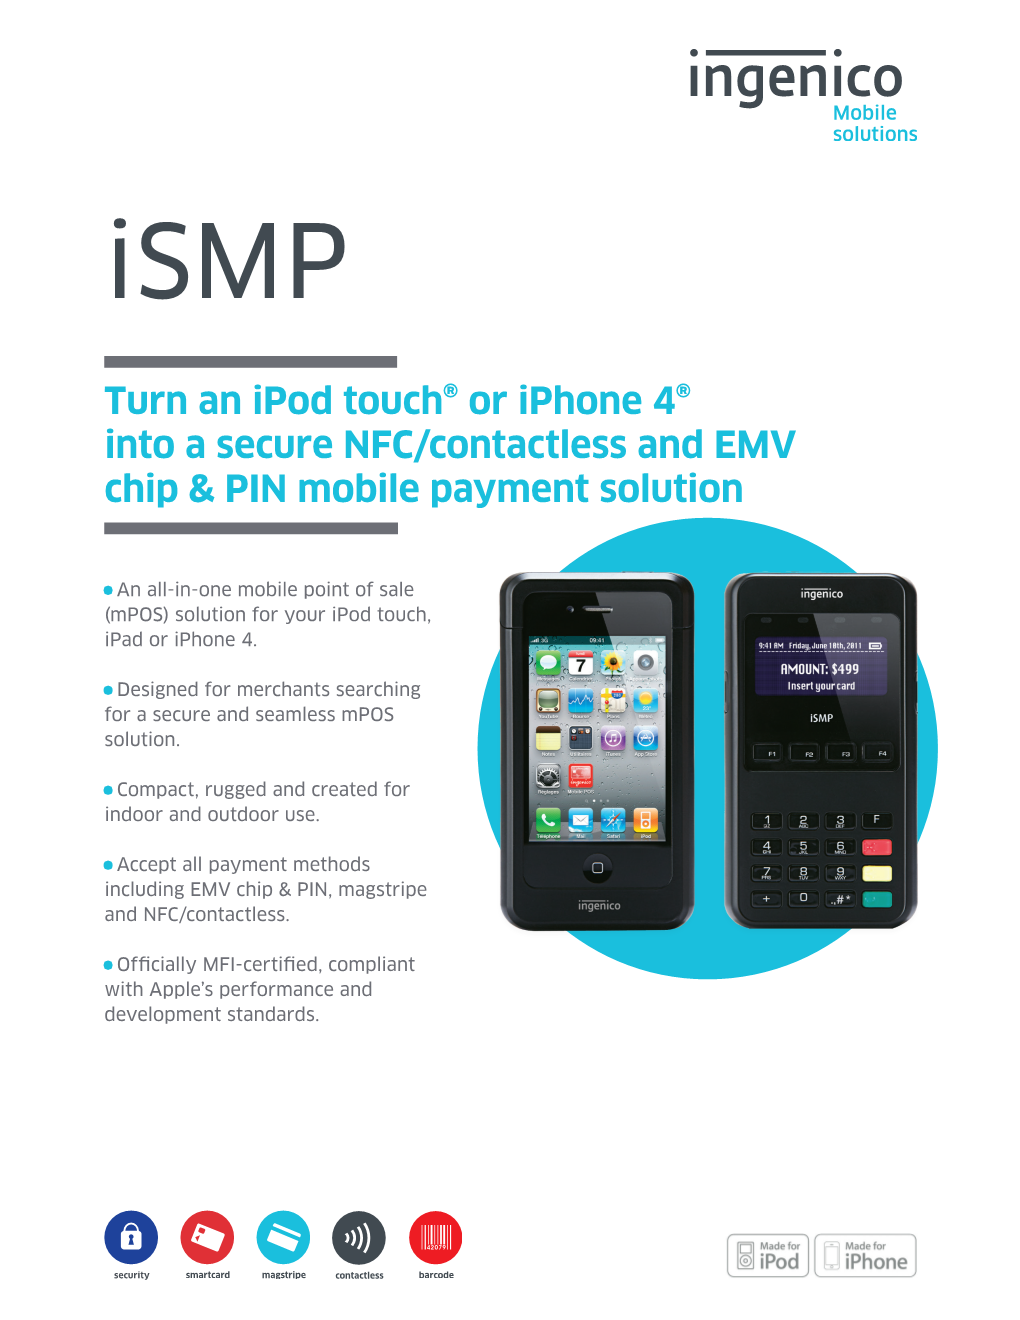 Turn an Ipod Touch® Or Iphone 4® Into a Secure NFC/Contactless and EMV Chip & PIN Mobile Payment Solution